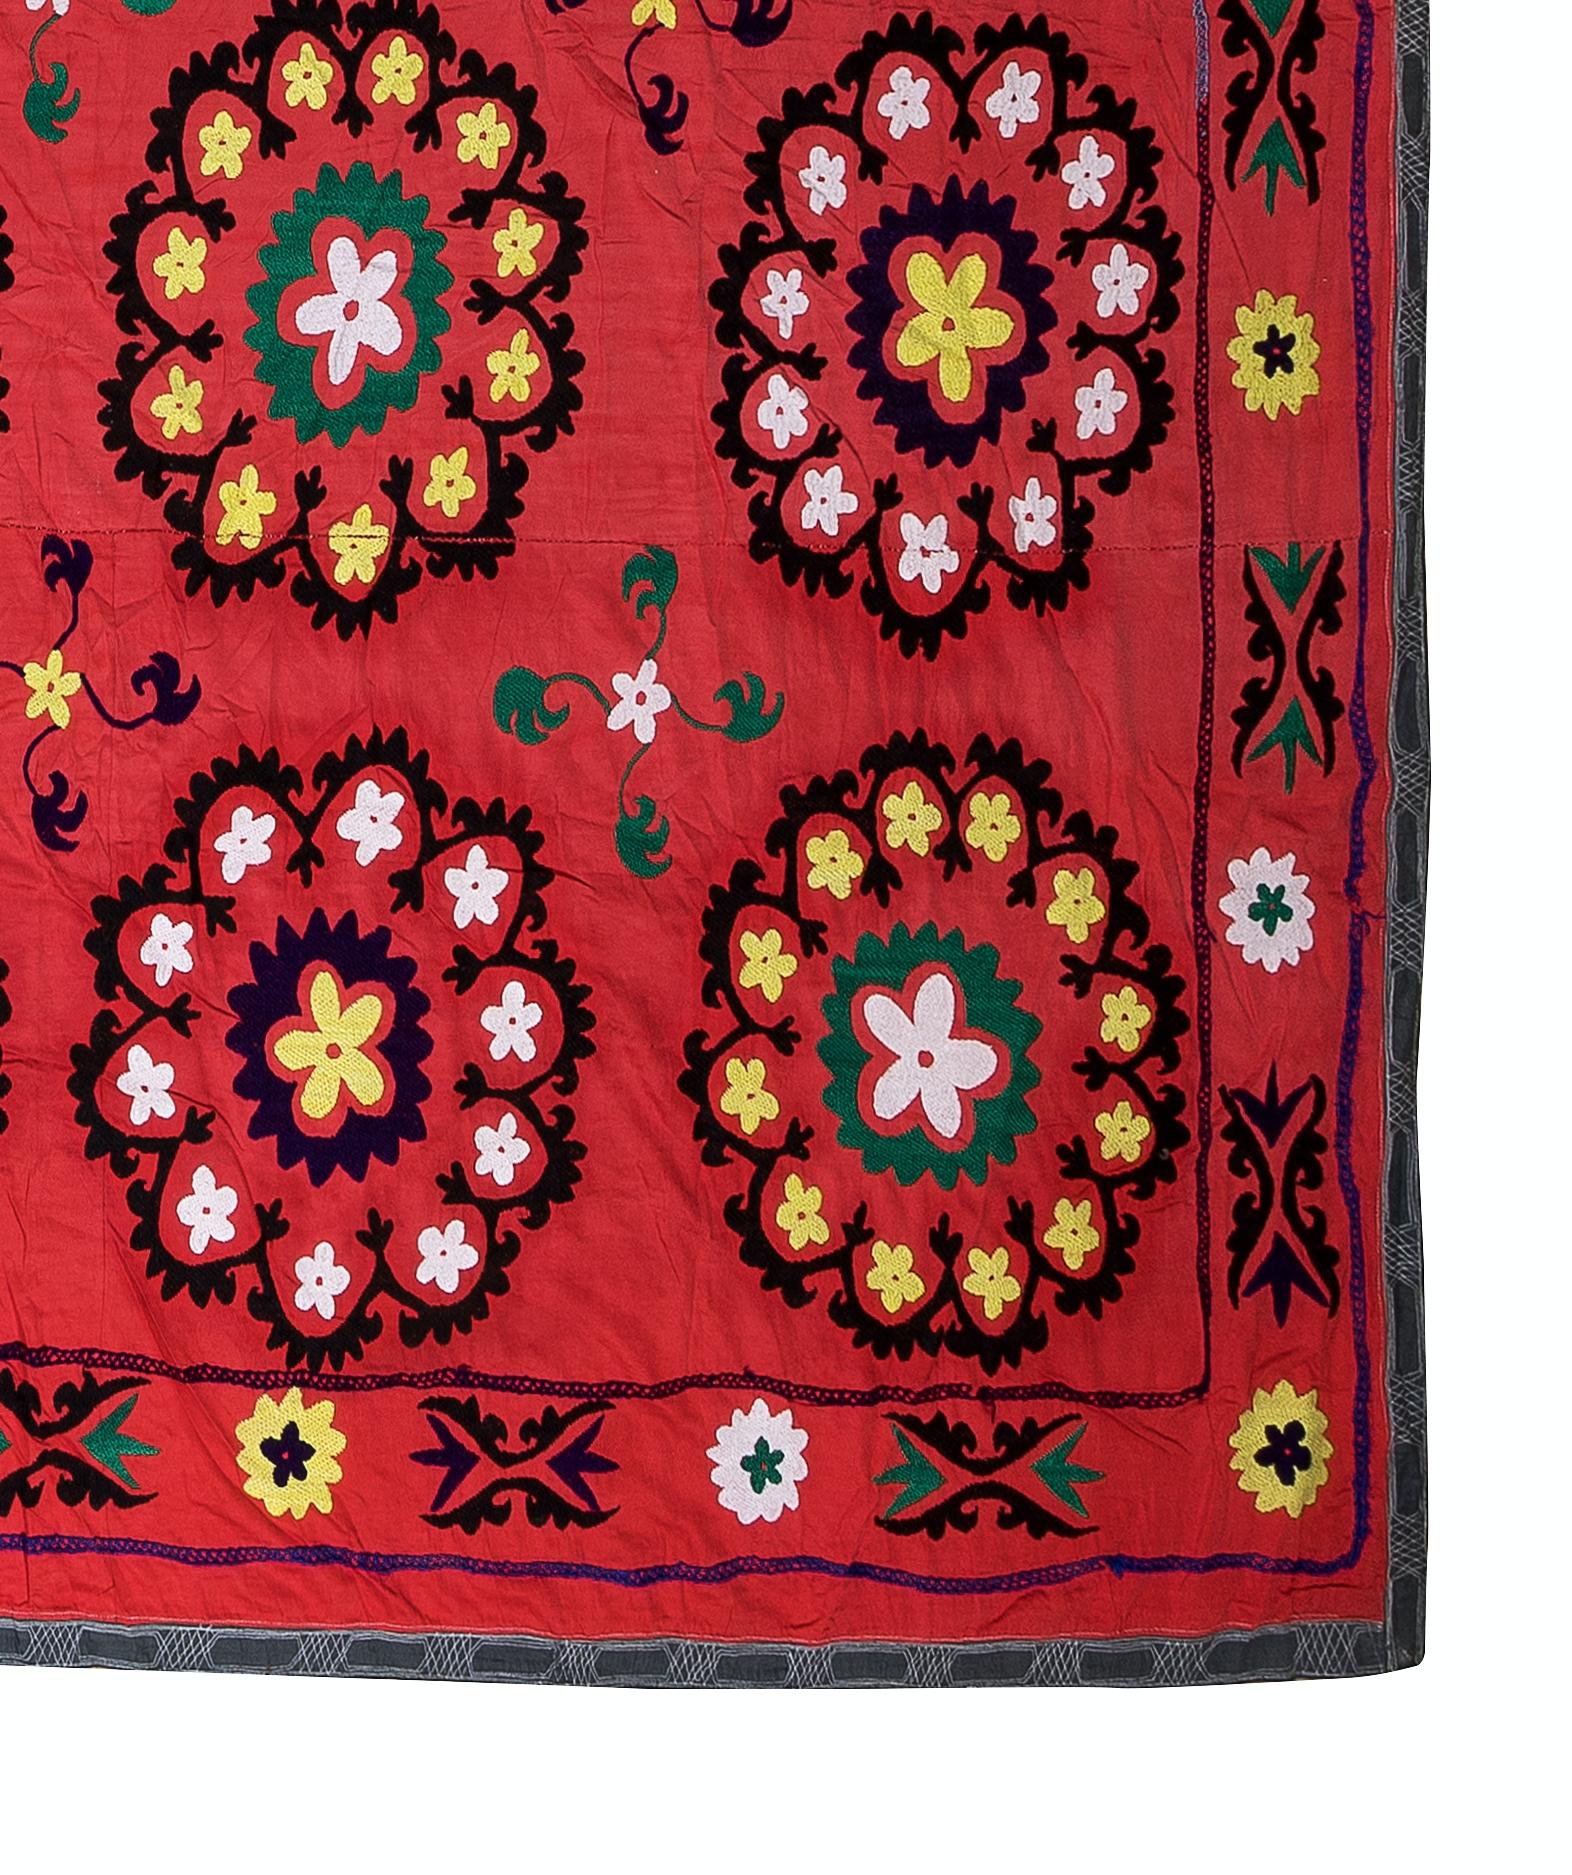 7.9x7.9 Ft Vintage Silk Embroidery Bed Cover, Uzbek Tablecloth, Red Wall Hanging In Good Condition For Sale In Philadelphia, PA